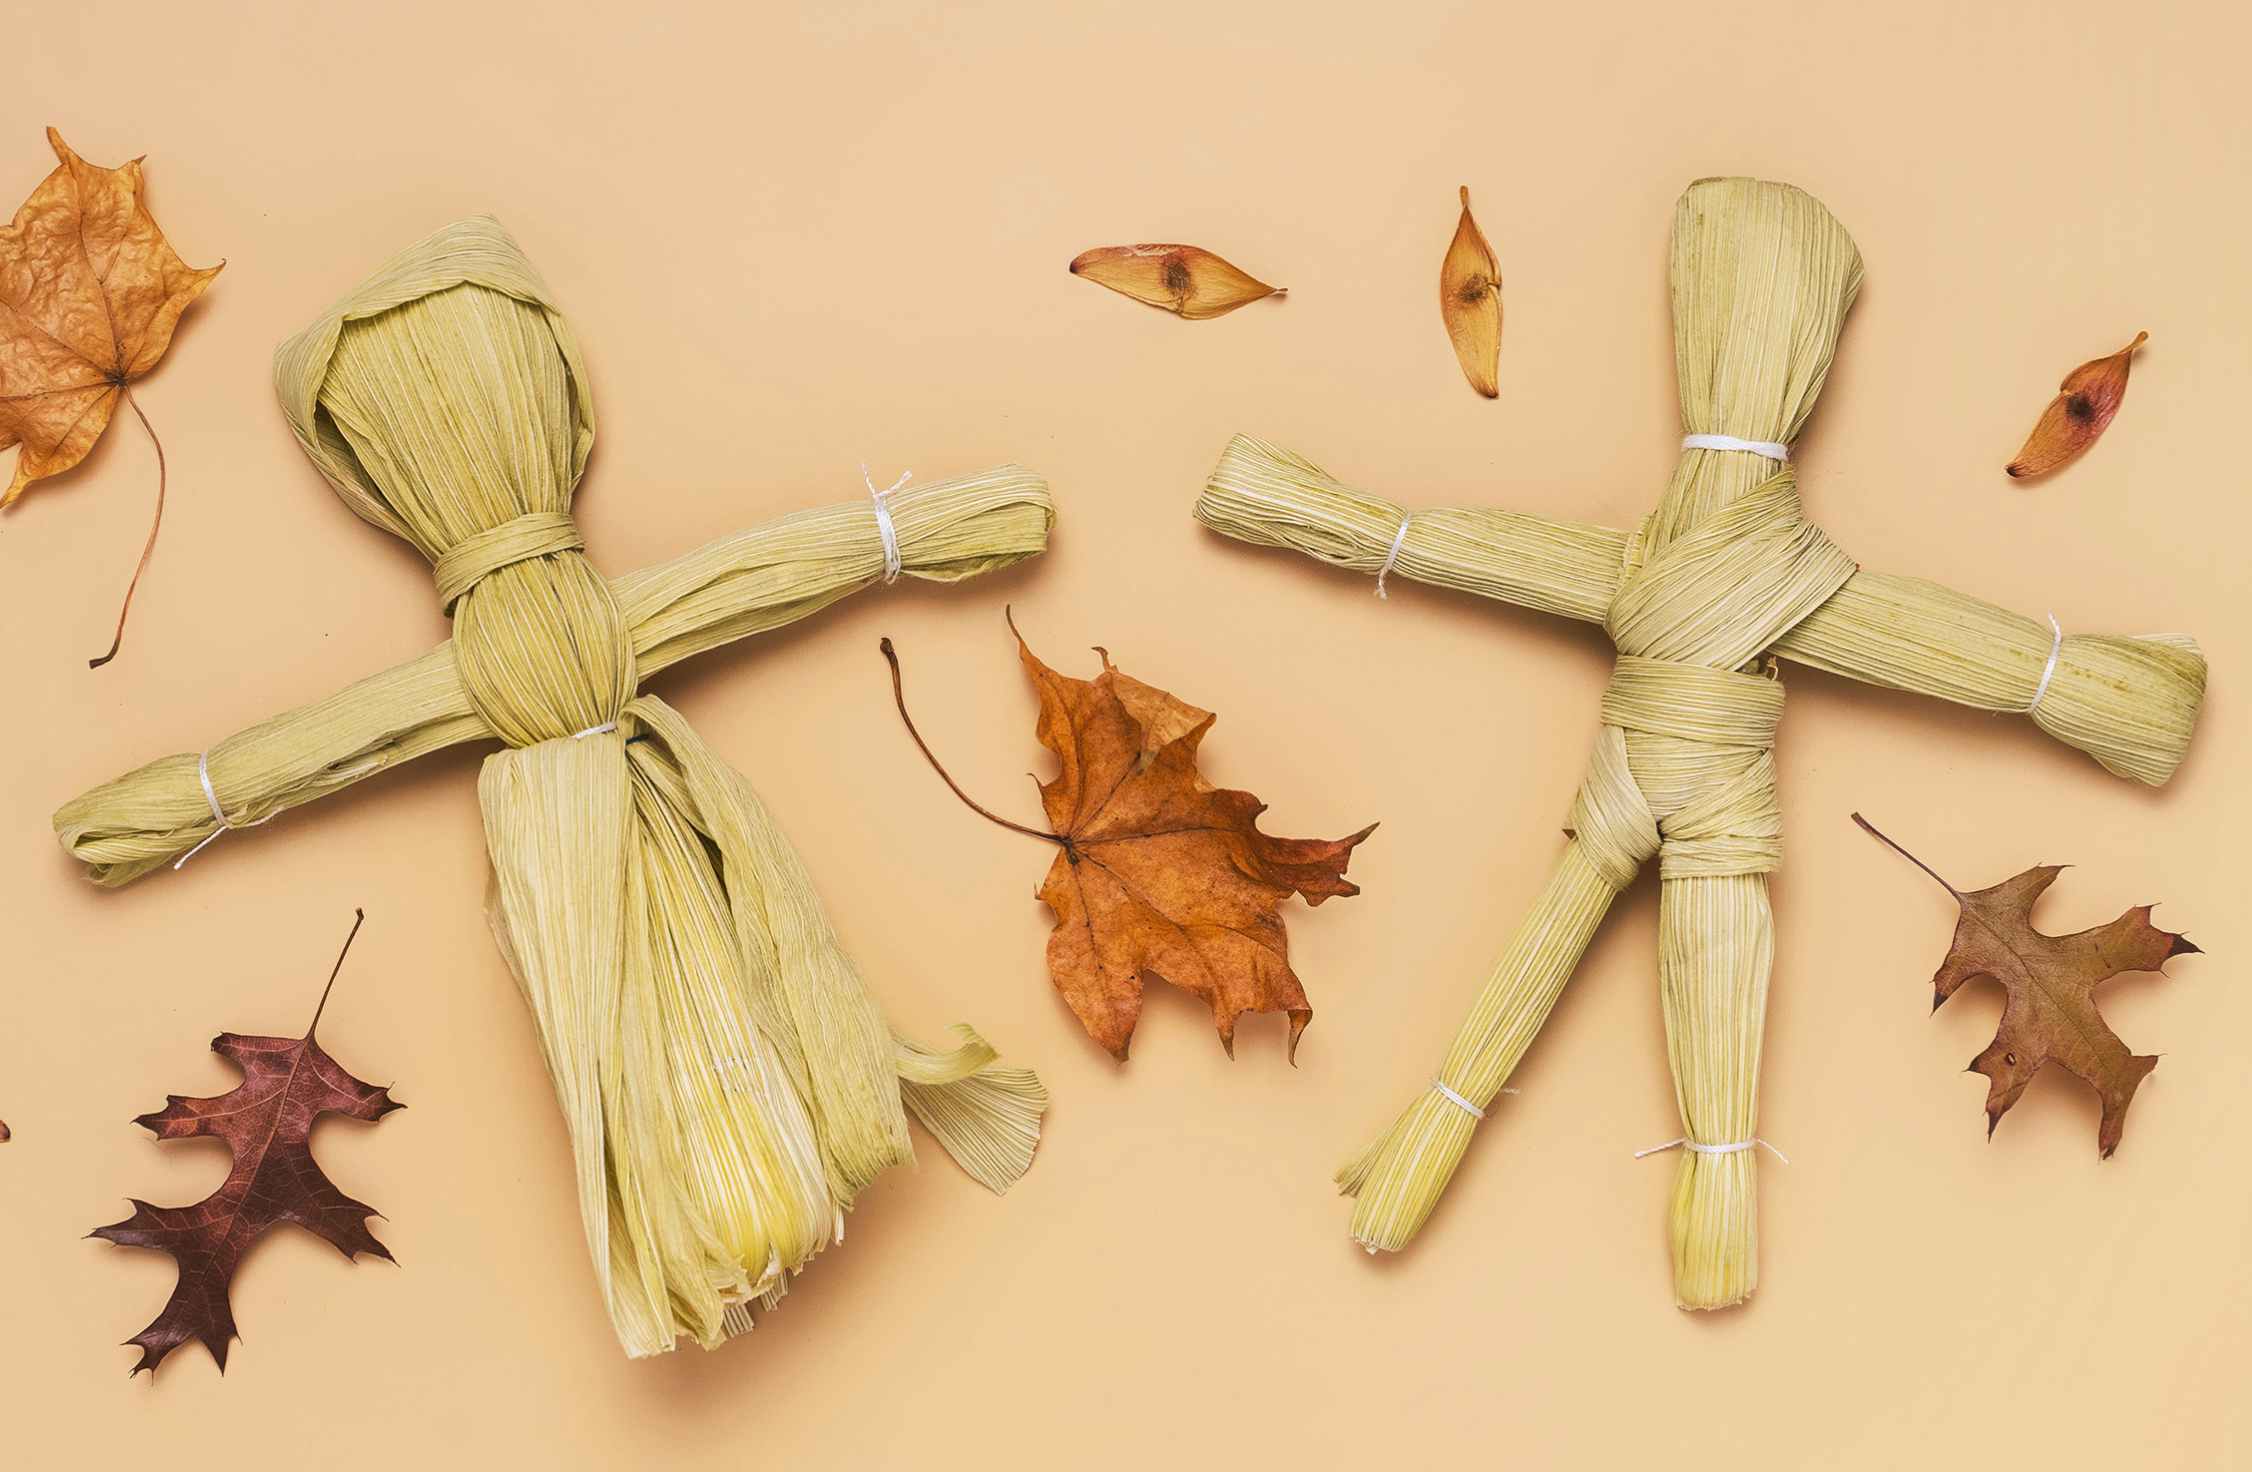 two DIY corn husk dolls with scattered leaves